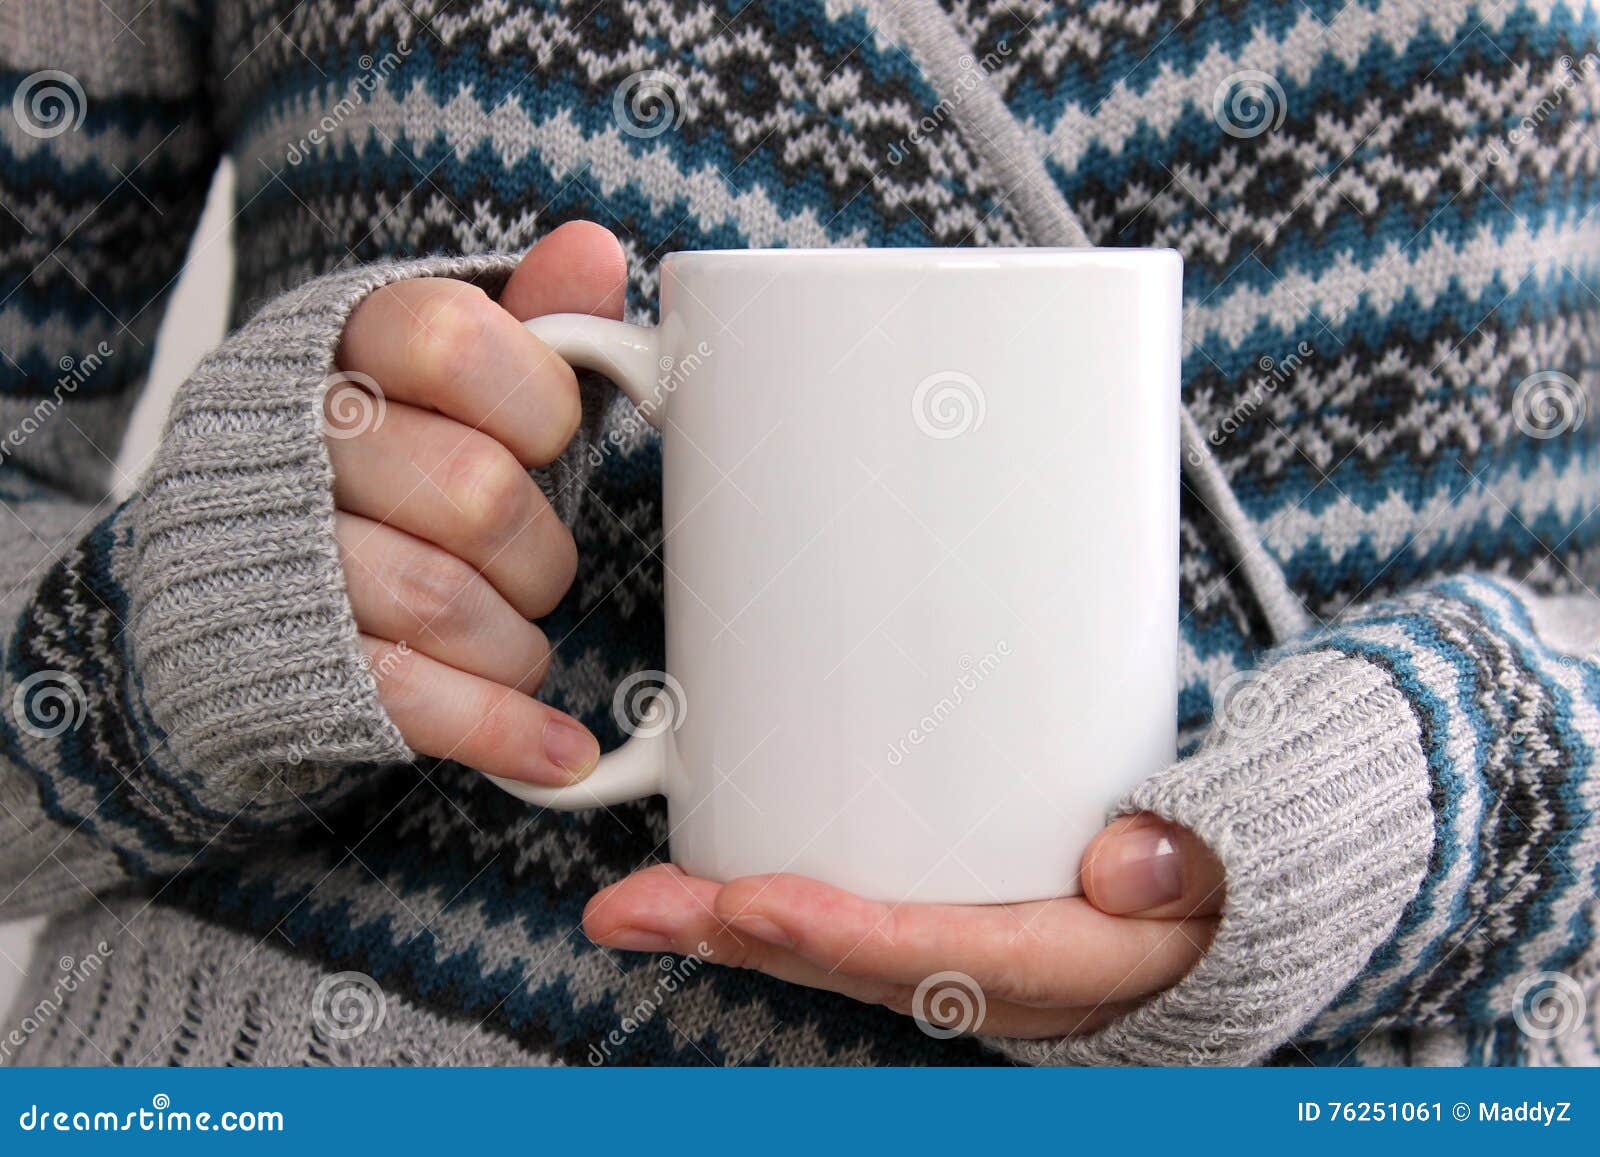 girl in a warm cardigan is holding white mug in hands.